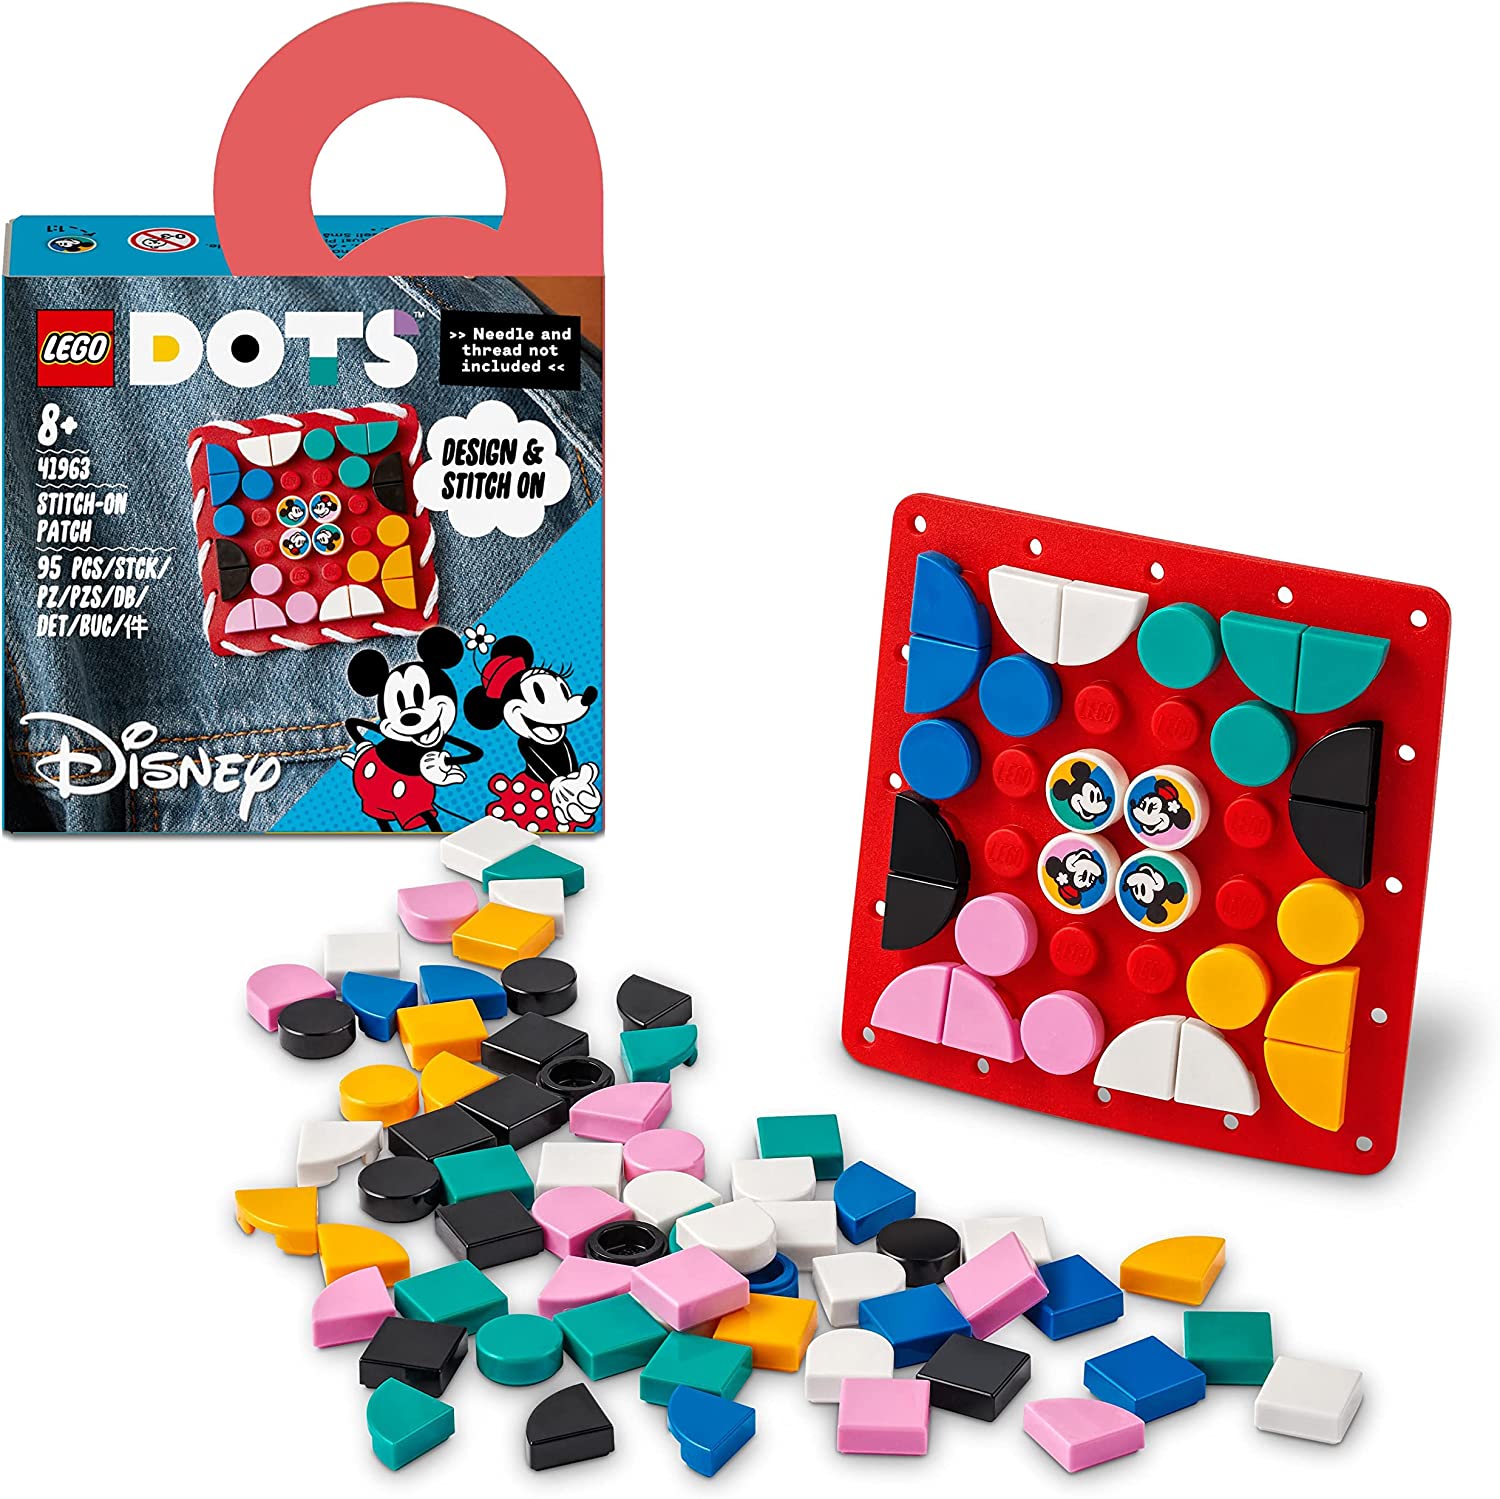 LEGO 41963 DOTS Mickey and Minnie Creative Patches DIY Craft Kit for Decorating Clothes Backpacks Accessories Creative Activity for Kids